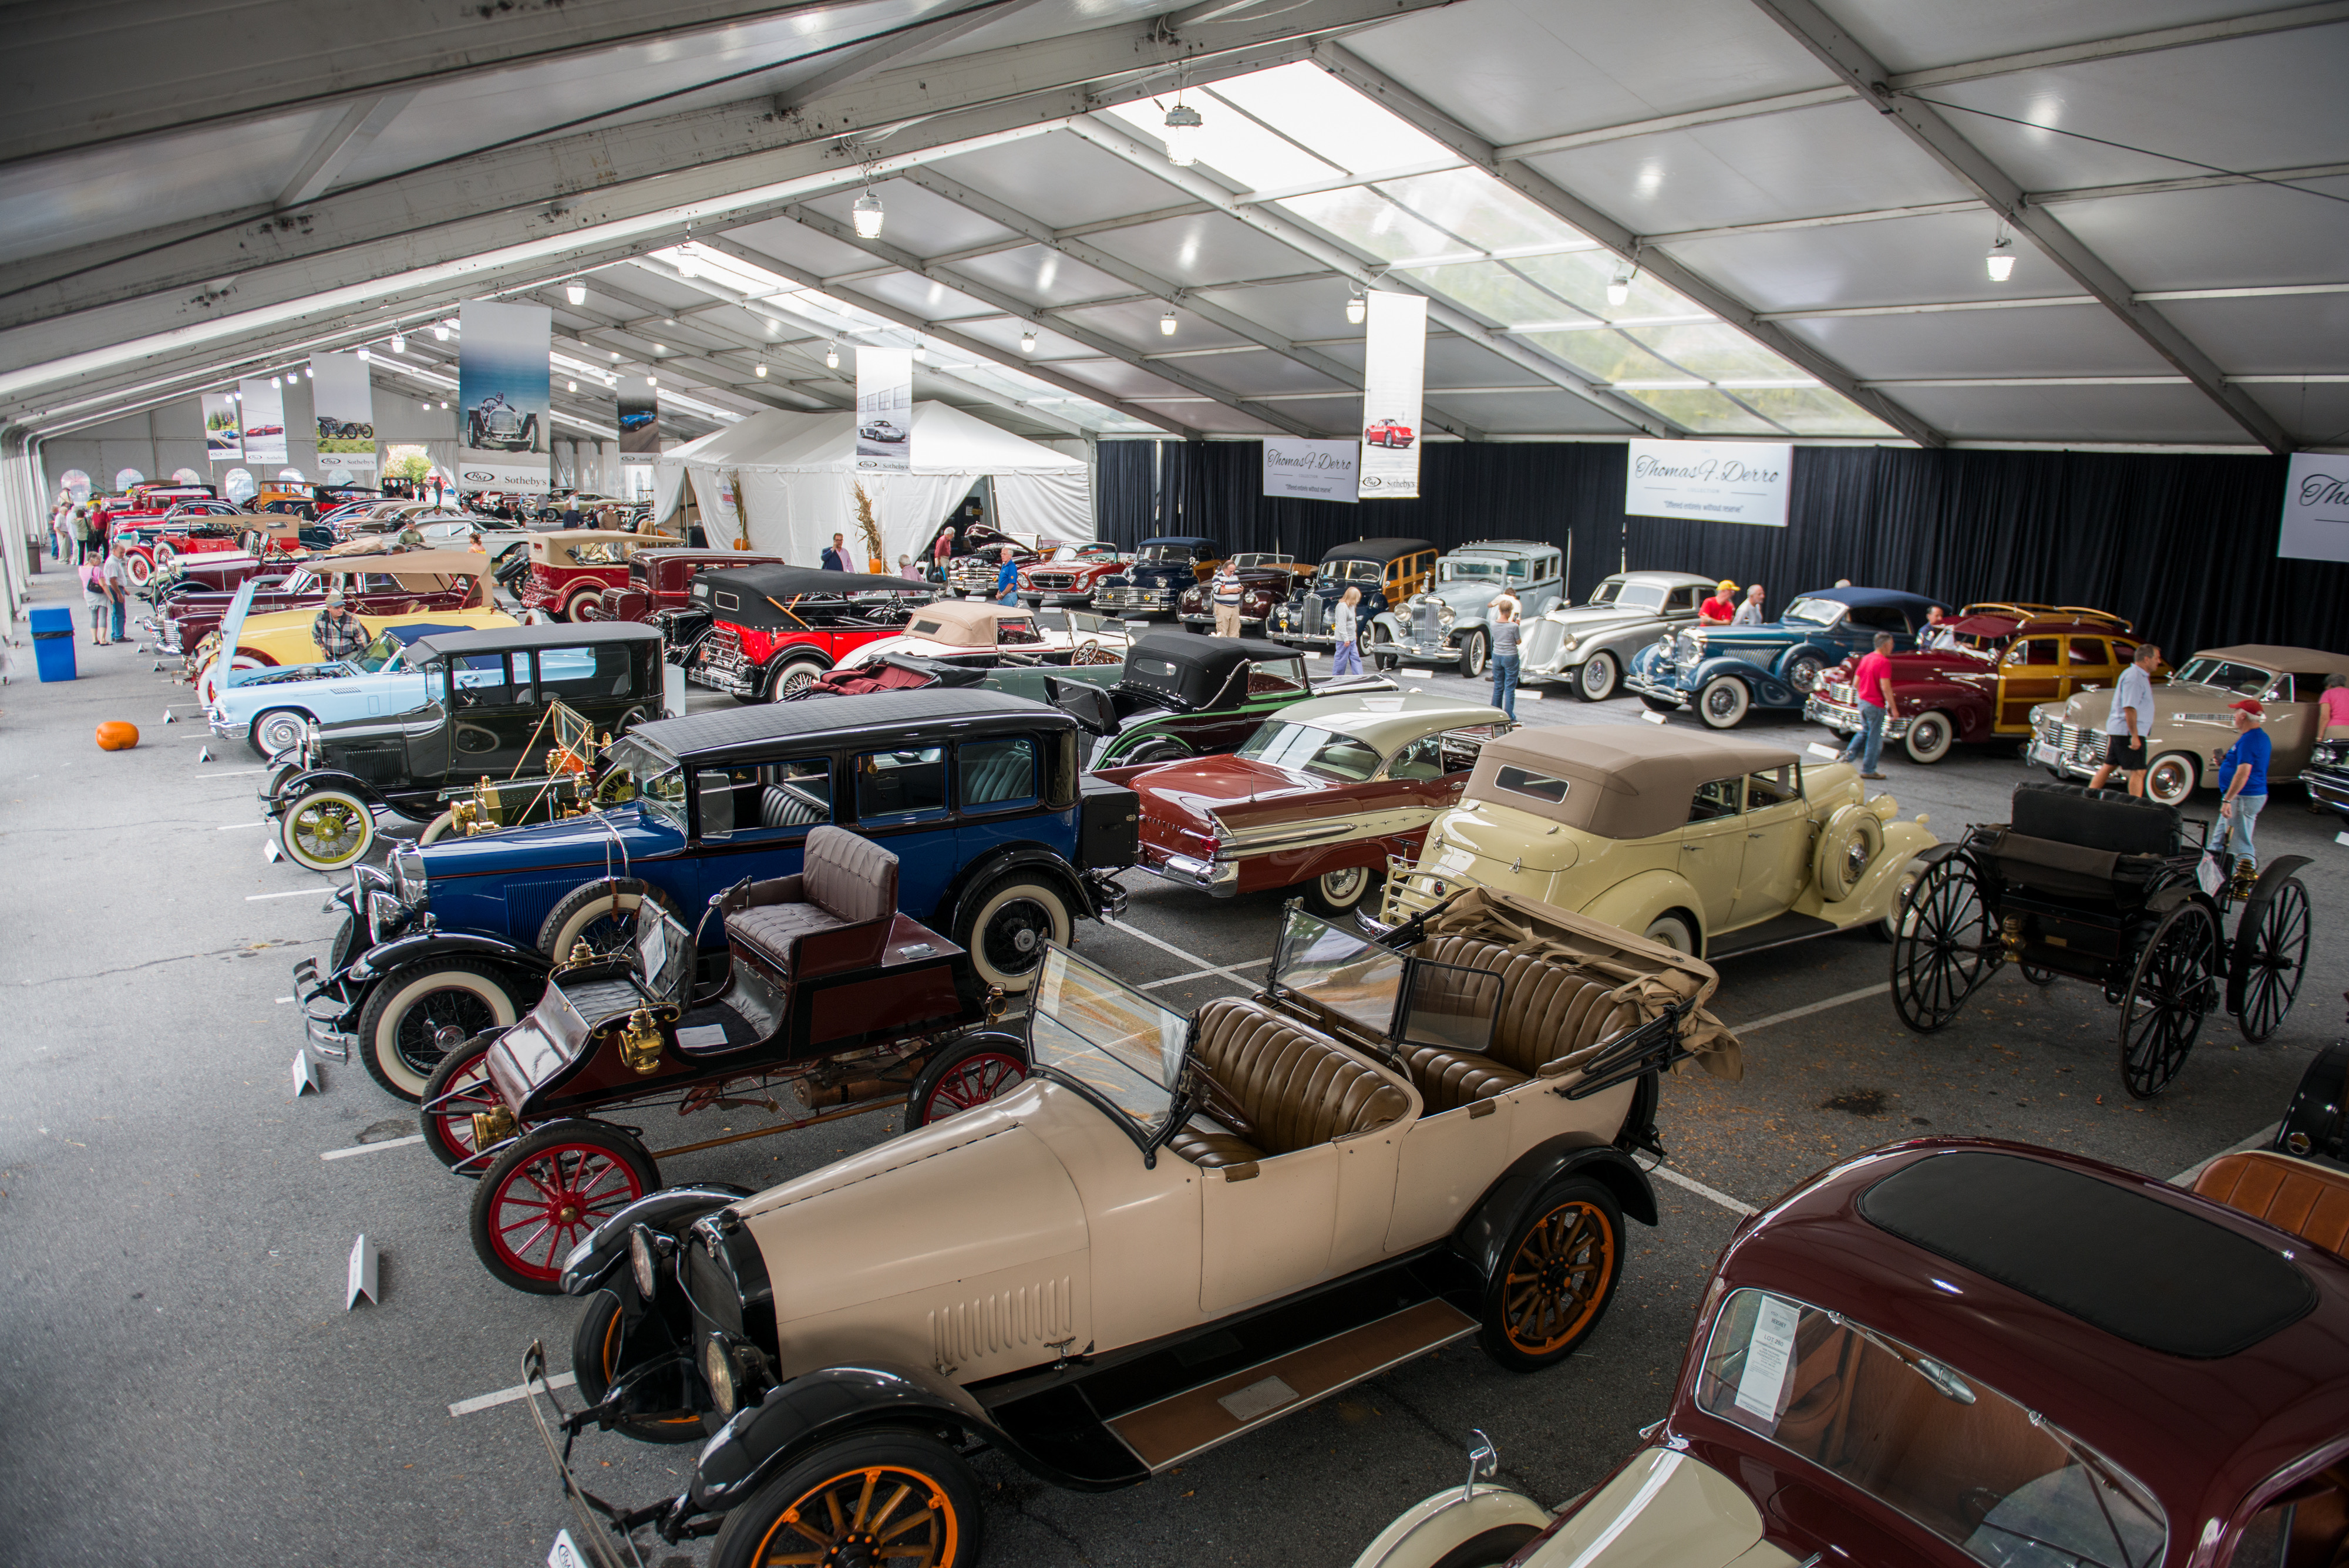 Hershey, American classics dominate RM auction at Hershey, ClassicCars.com Journal